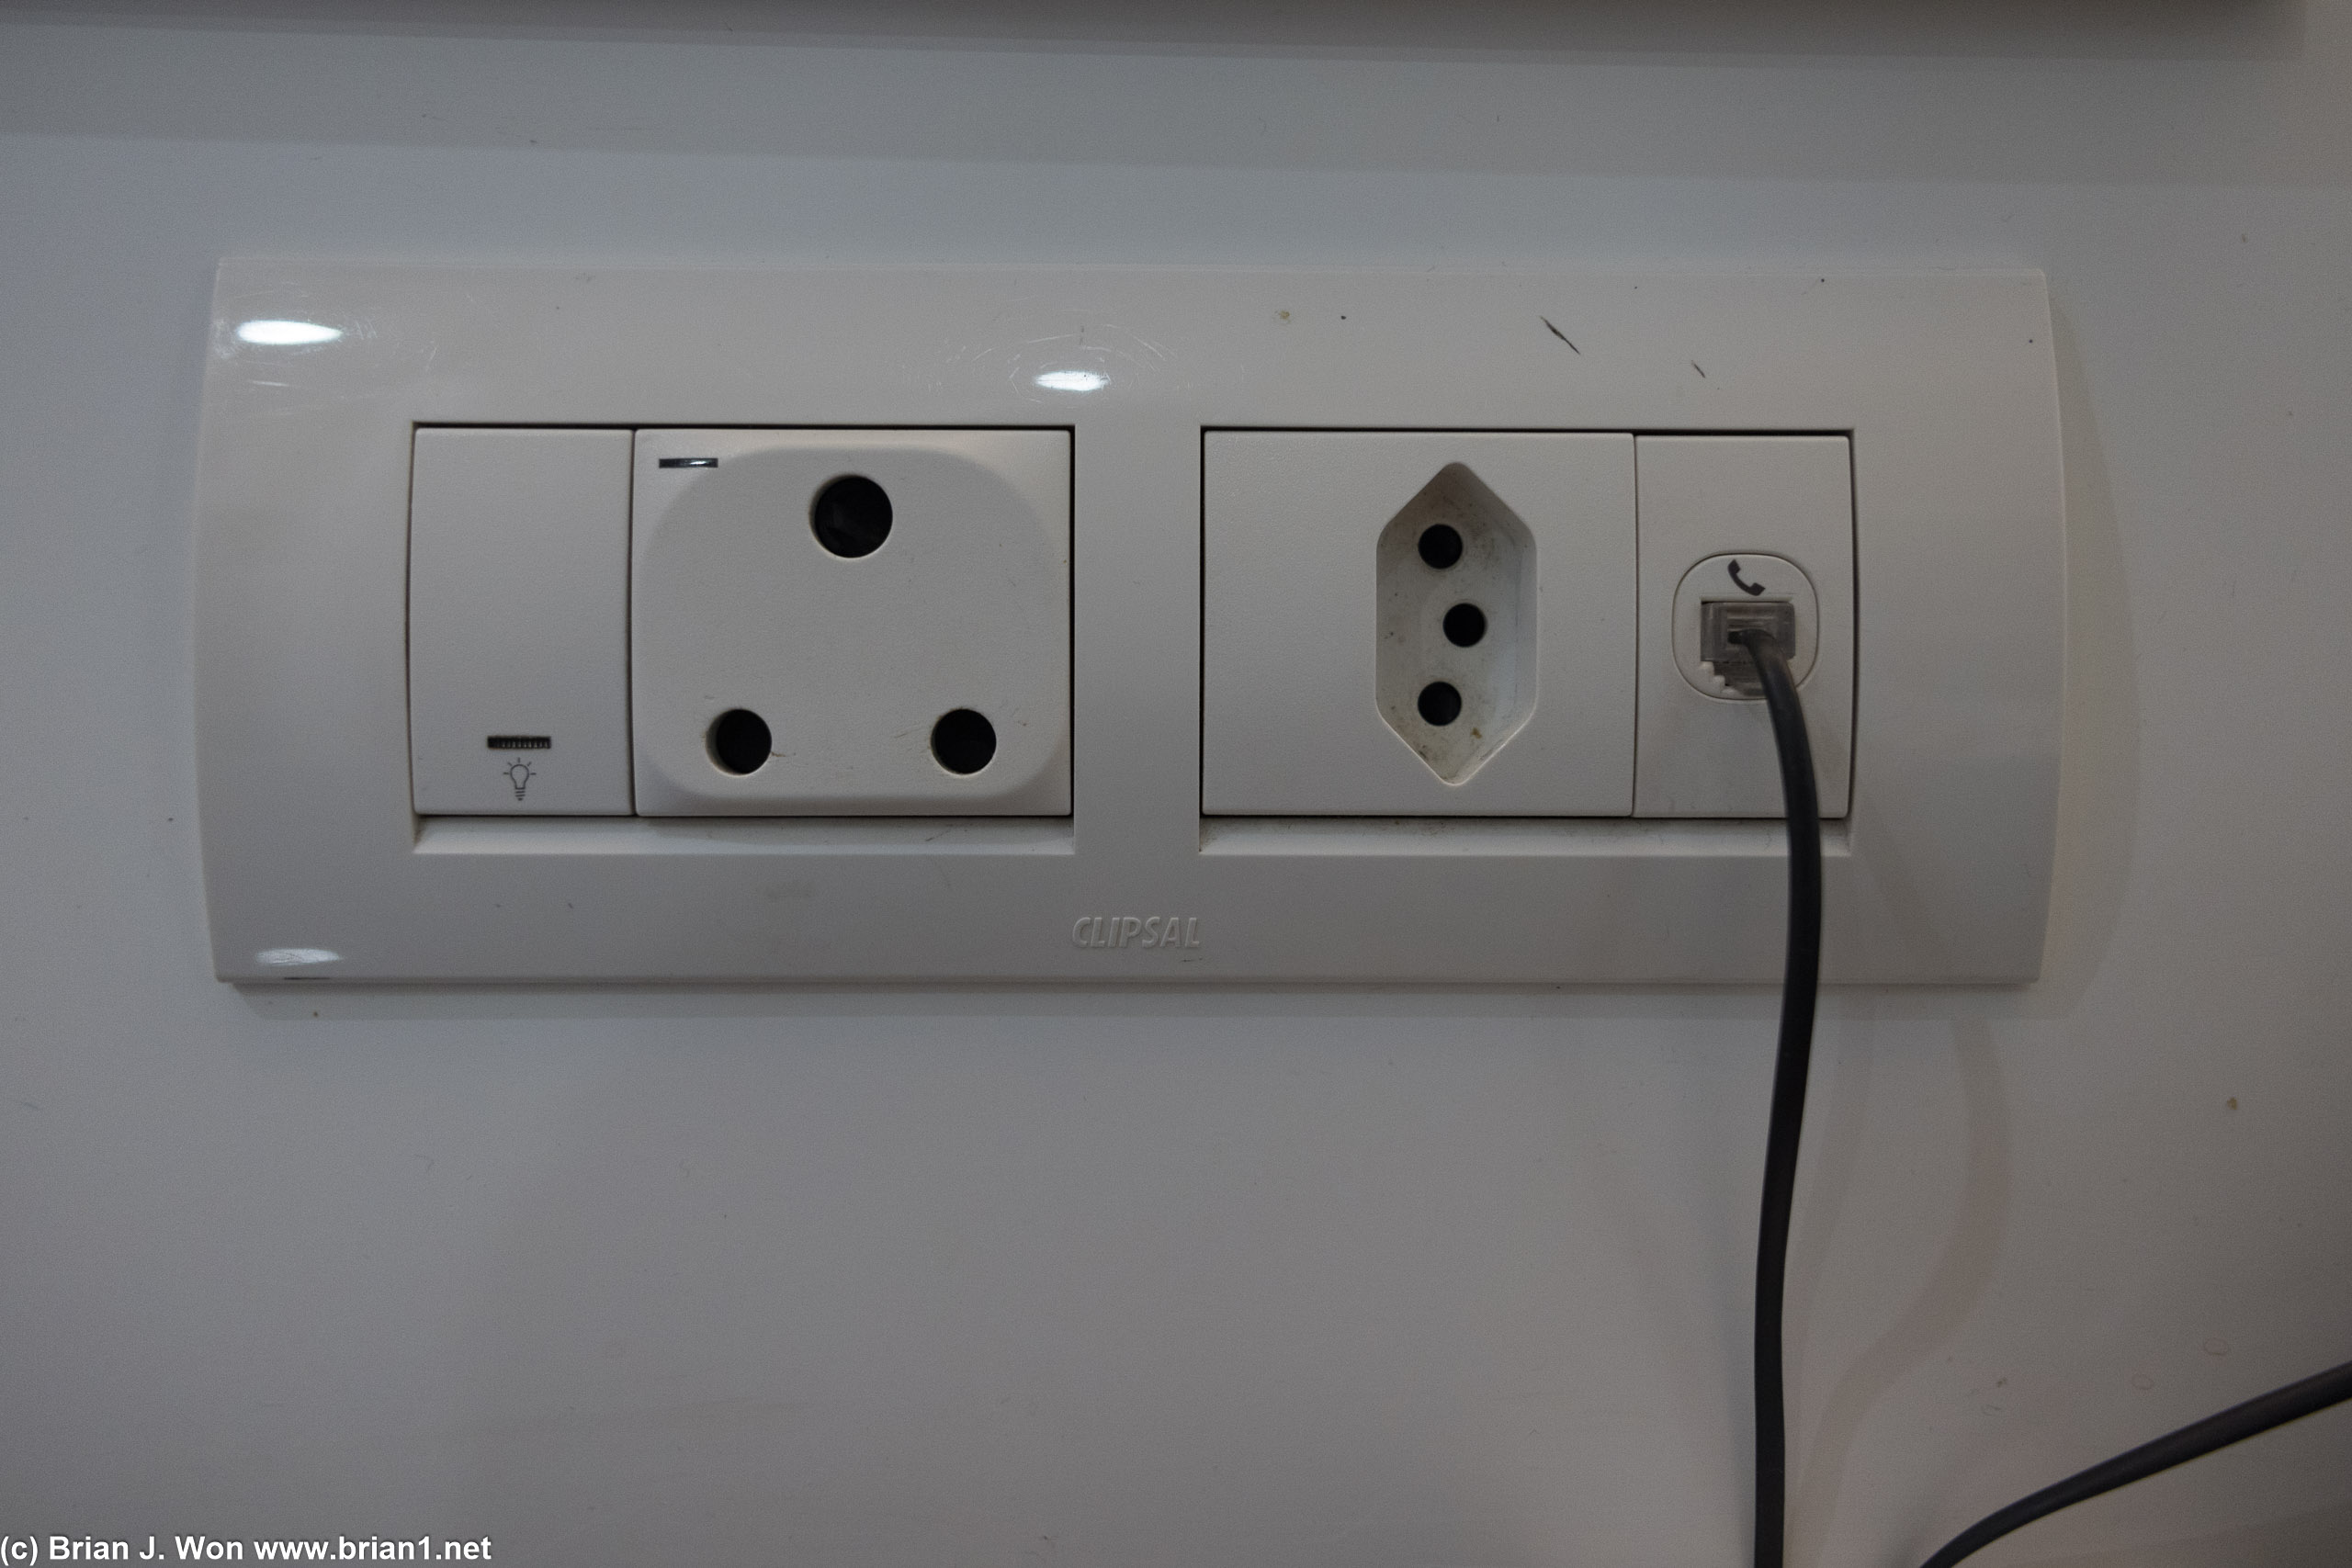 Surprised to see both South Africa and EU power plugs. The condition of the room is just okay.